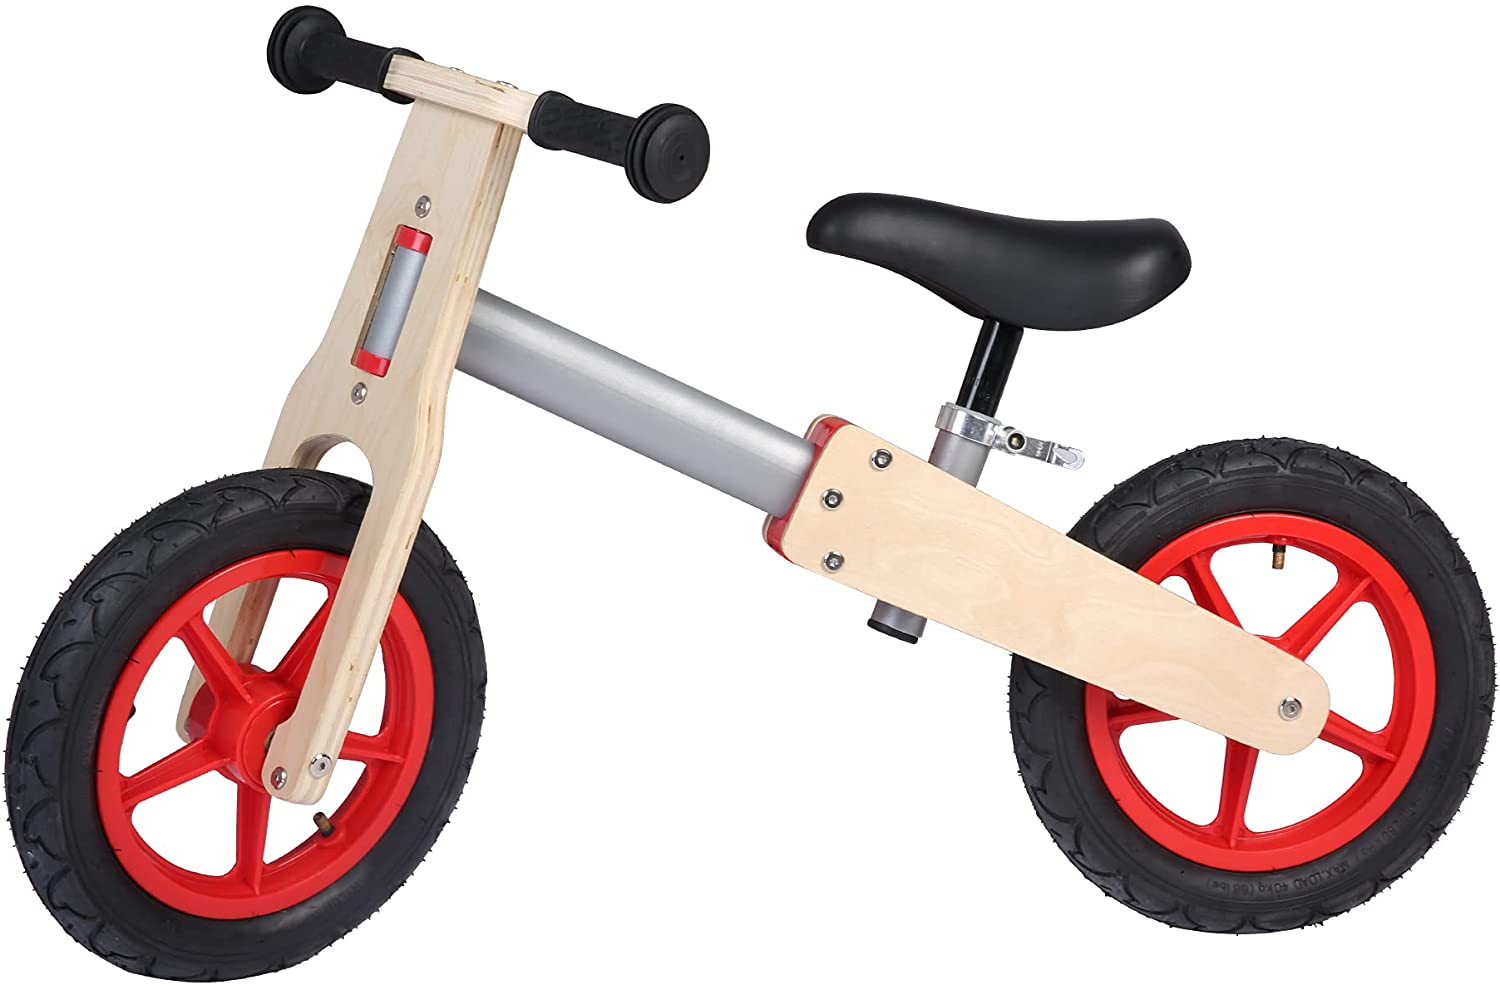 Wooden Sport Kids' Balance Bike with Adjustable Seat for Kids 3+ Years Old